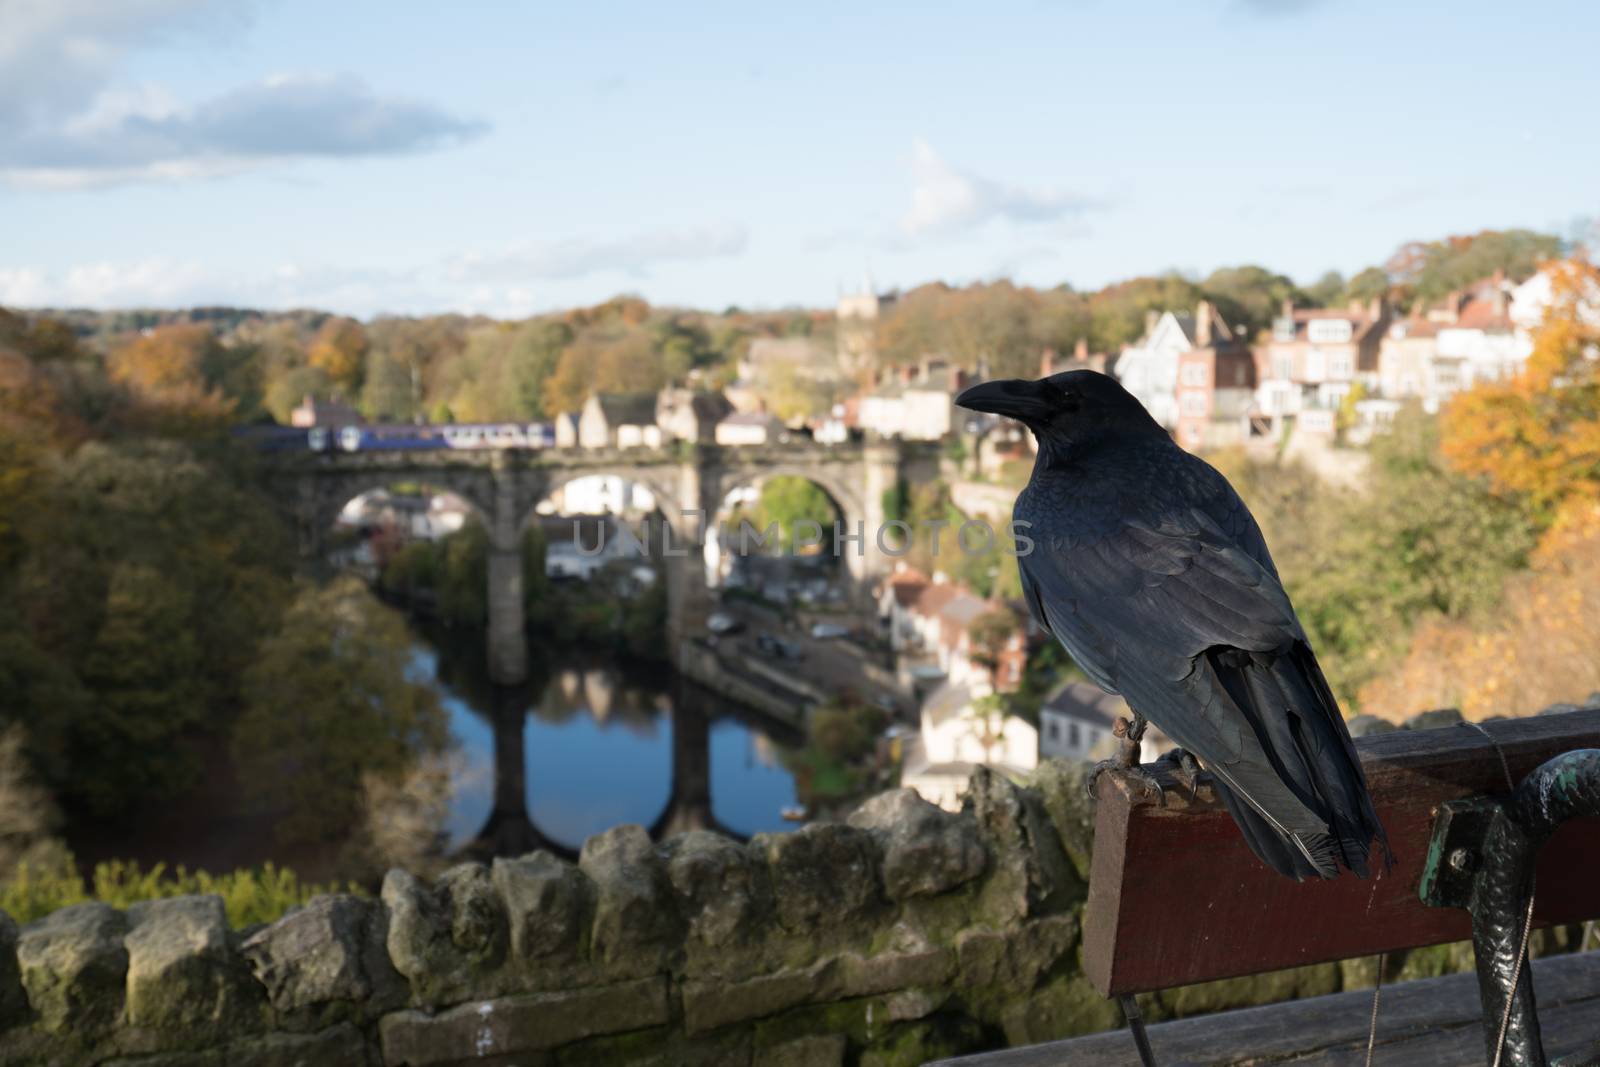 A black crow overlooking the view of Knaresborough viaduct